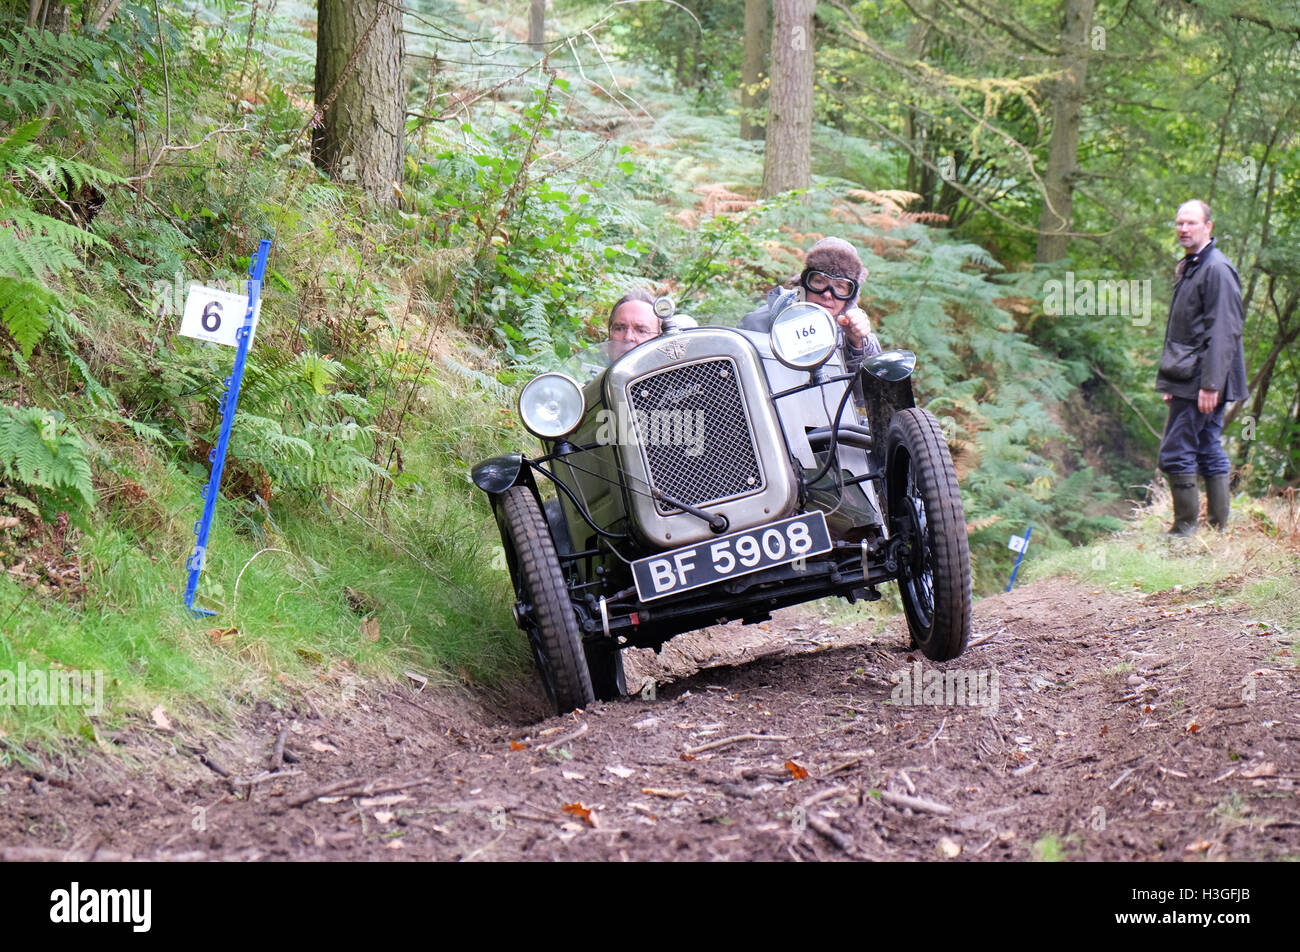 The Smatcher, New Radnor, Powys, Wales, UK - Saturday 8th October 2016 - A 1930 Austin 7 Ulster Replica competes in the Vintage Sports-Car Club ( VSCC ) hill climb at The Smatcher a steep wooded hillside in Powys. Competitors earn points not for speed or time but how far up the hill they manage to drive their vintage sports car. Stock Photo